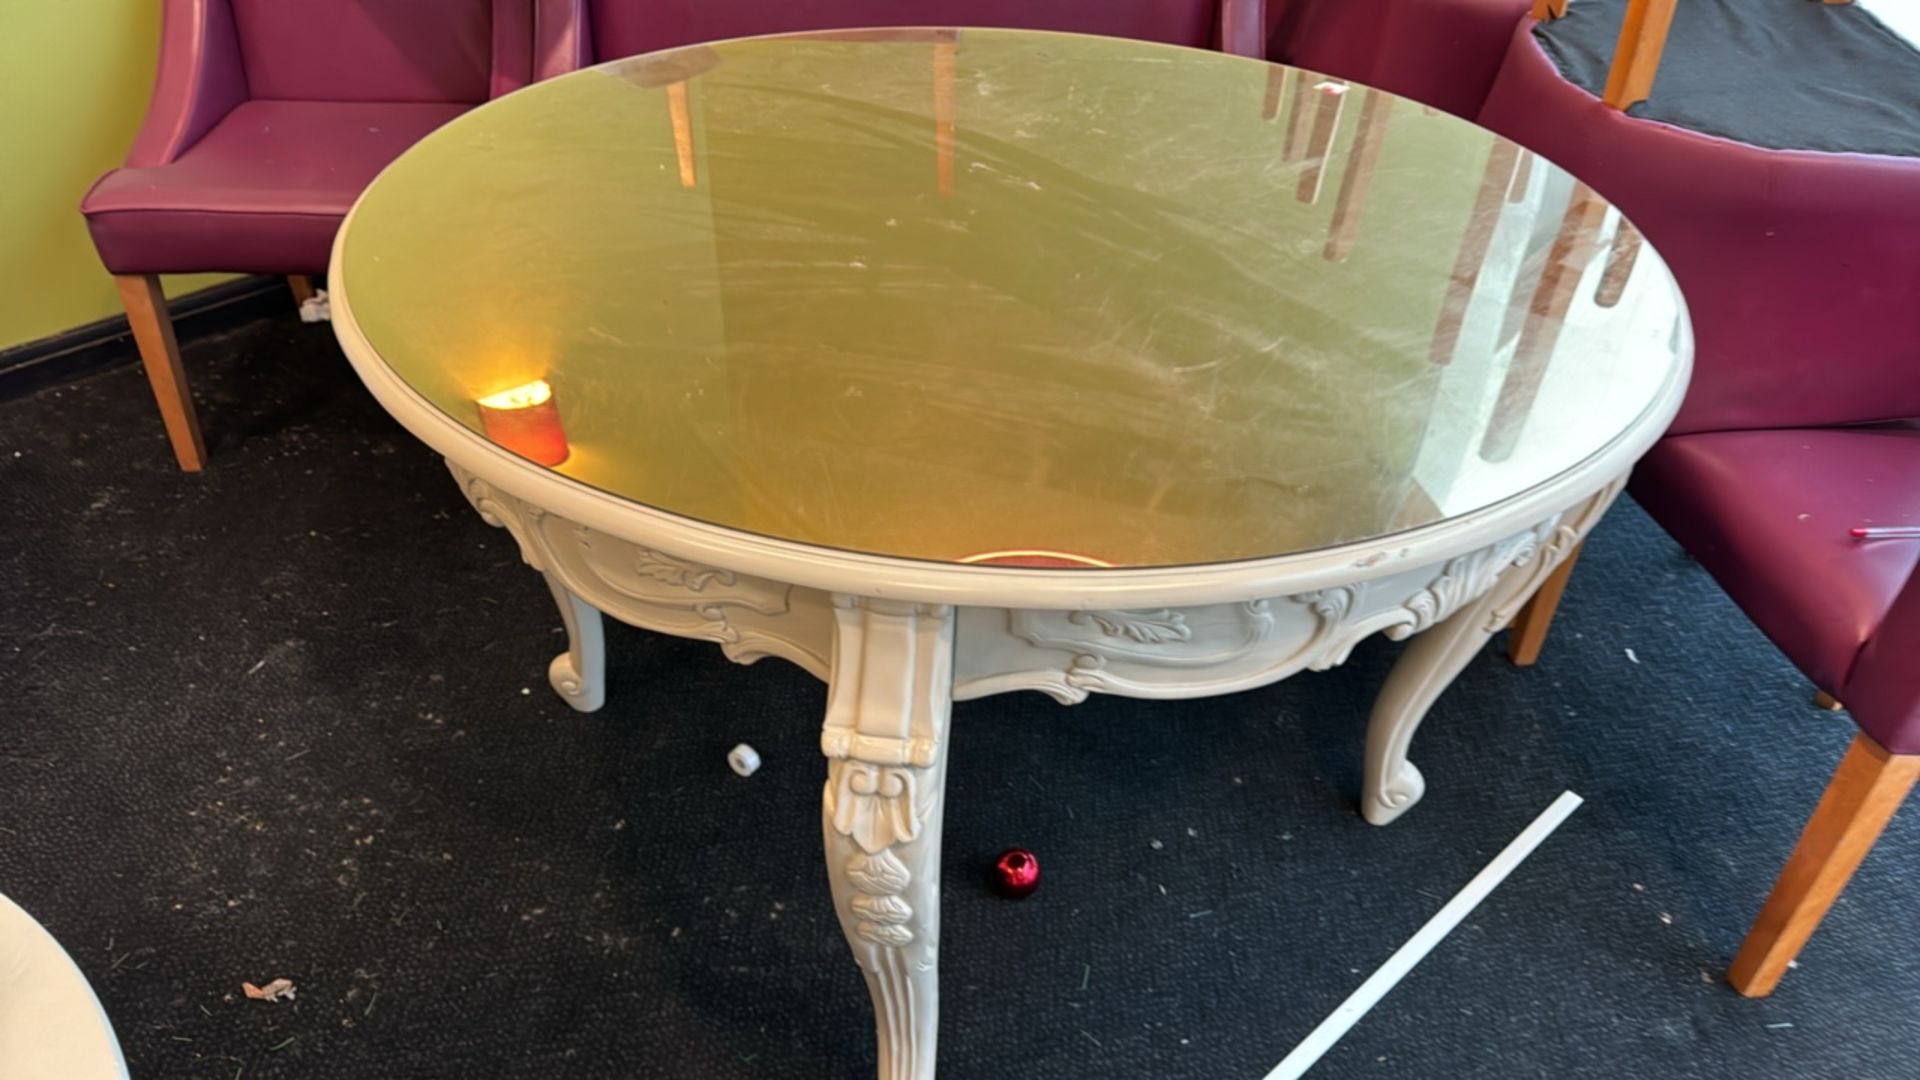 Circular Wood Table with Mirrored Glass Top - Bild 2 aus 4